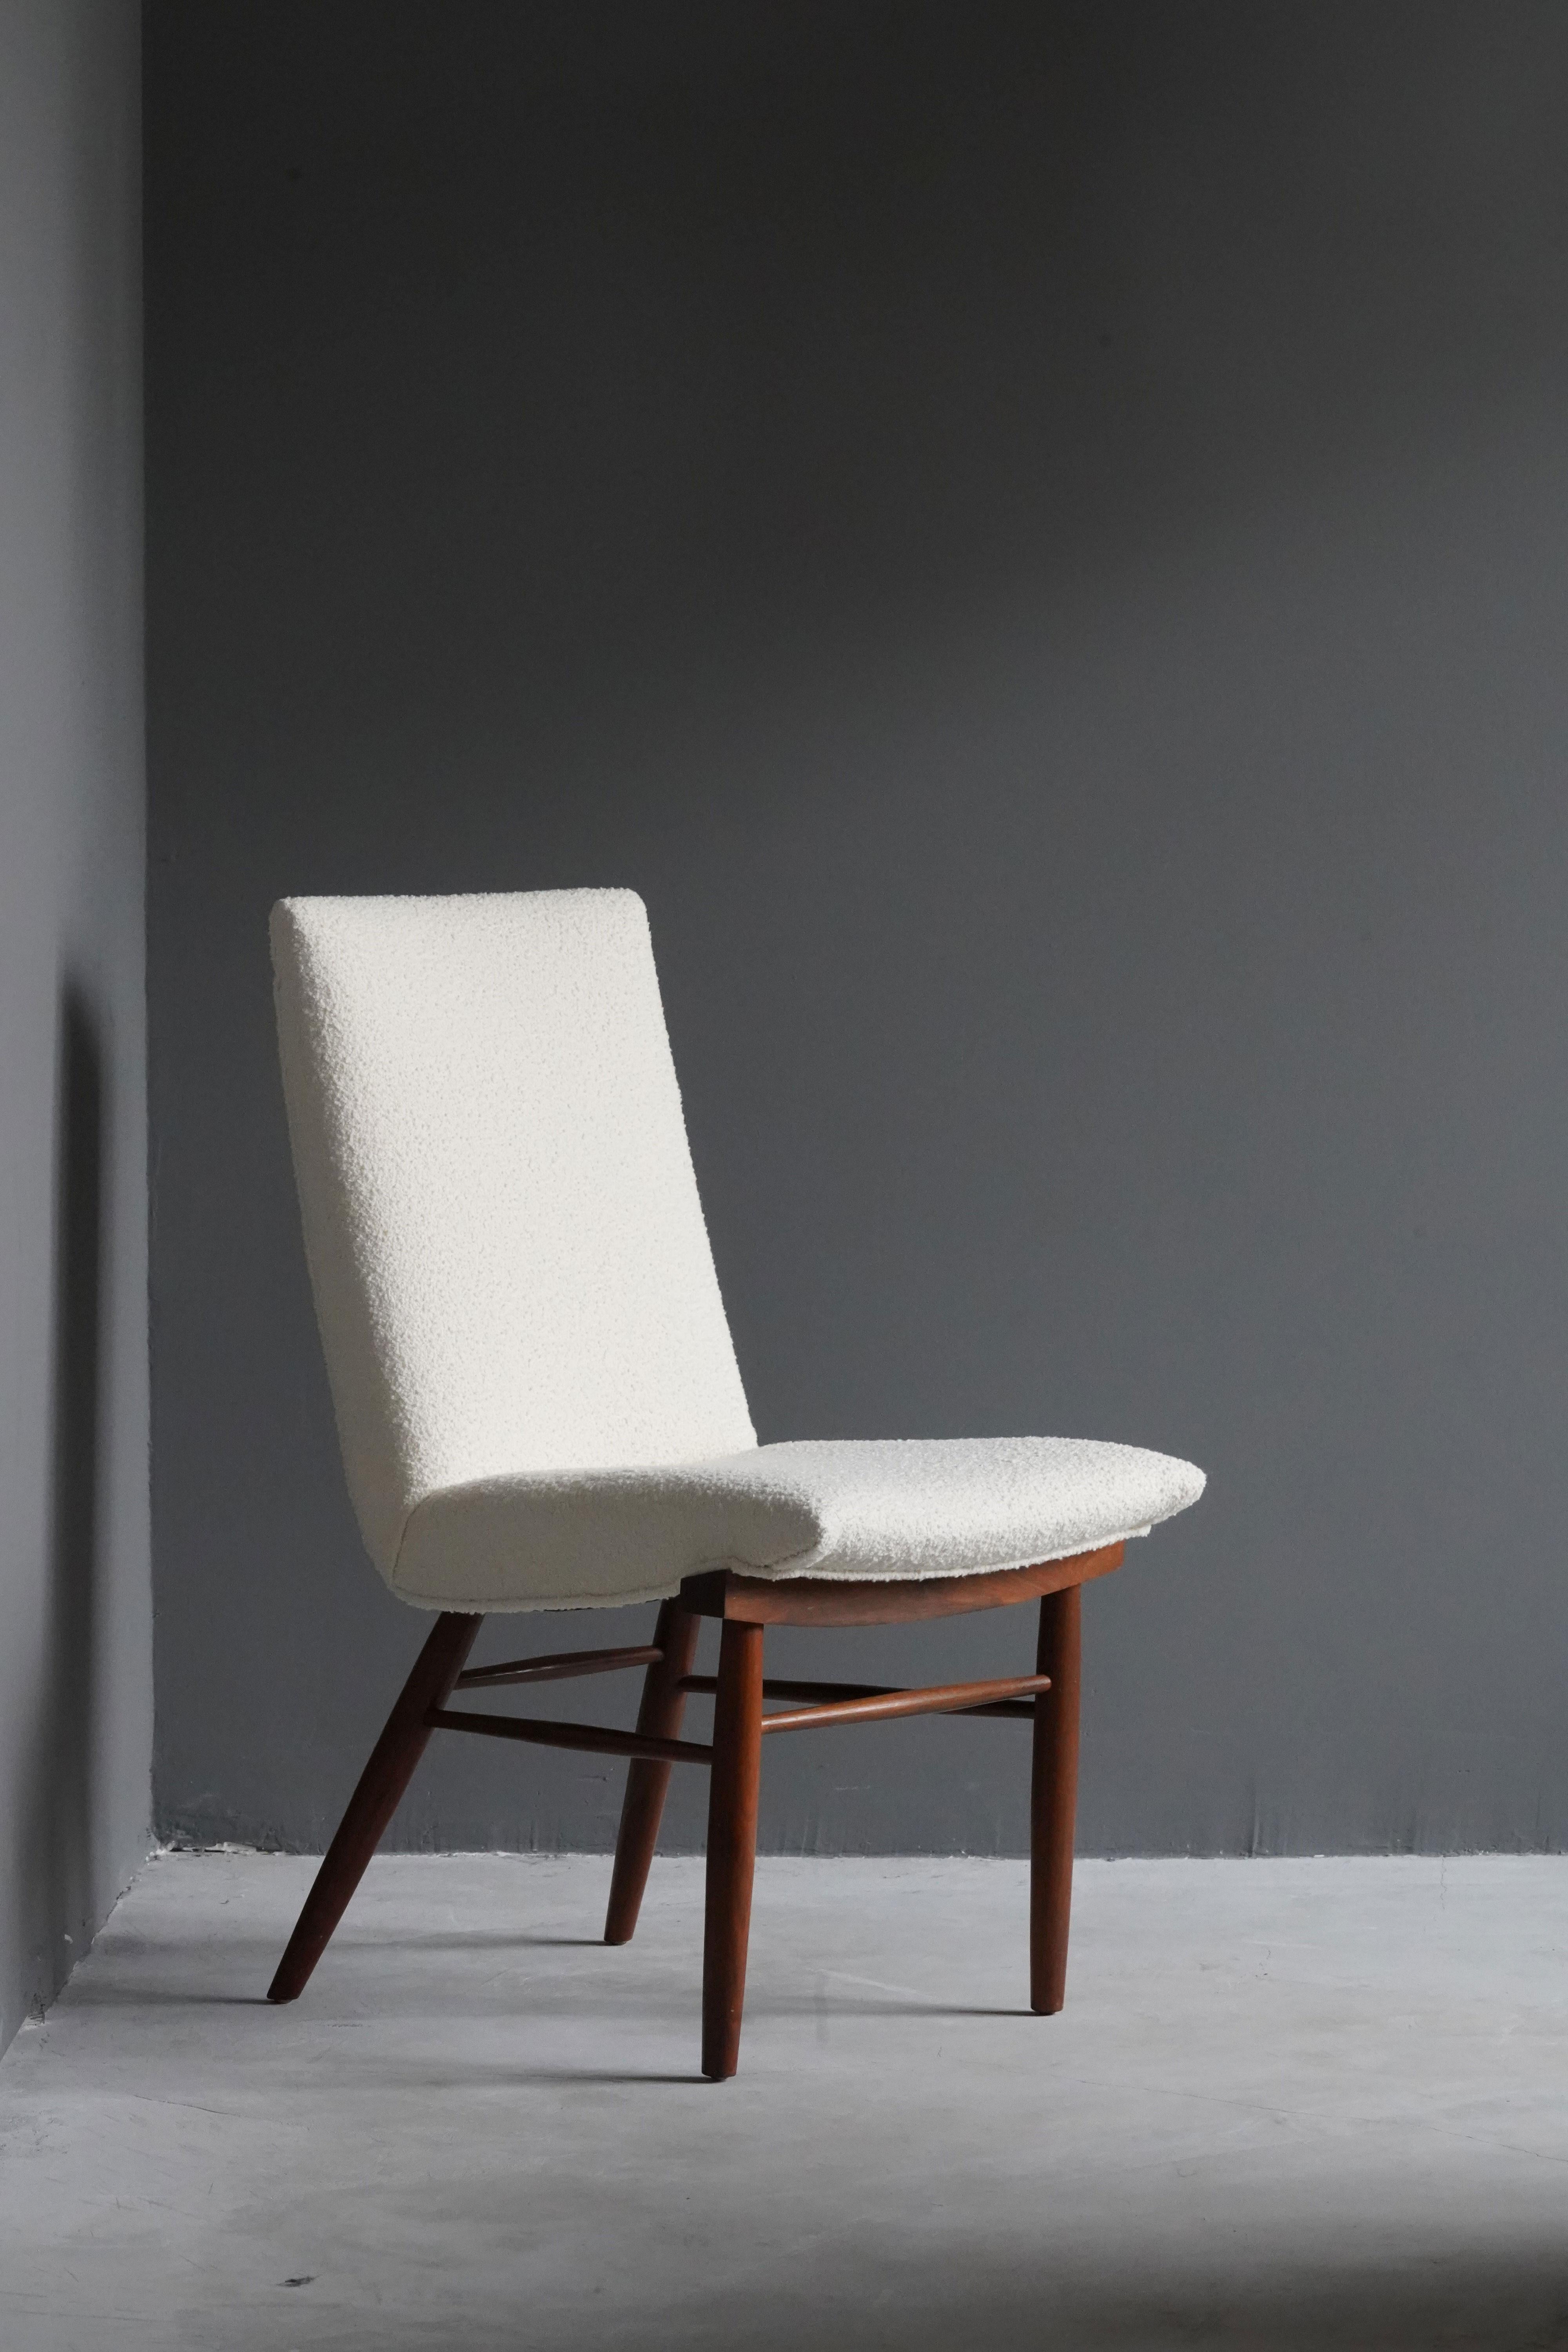 A side chair, designed by George Nakashima, produced by Widdicomb Furniture Company, Grand Rapids, Michigan, America, 1960s.

Features finely turned walnut, overstuffed seat reupholstered in Knoll Bouclé fabric.